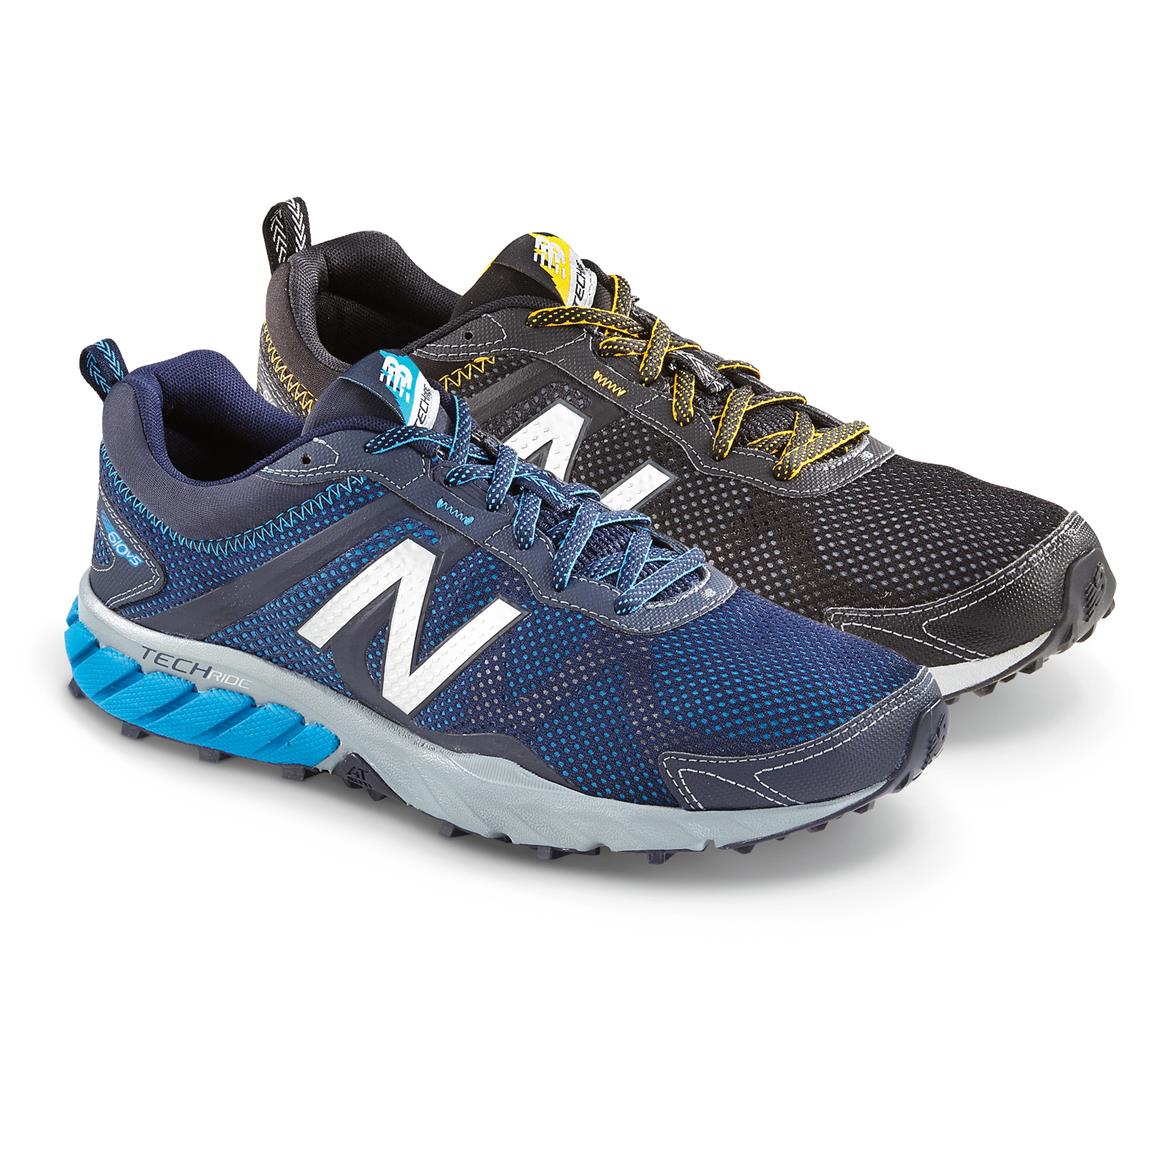 New Balance 610v5 Shoes - 649028, Running Shoes & Sneakers at Sportsman's Guide